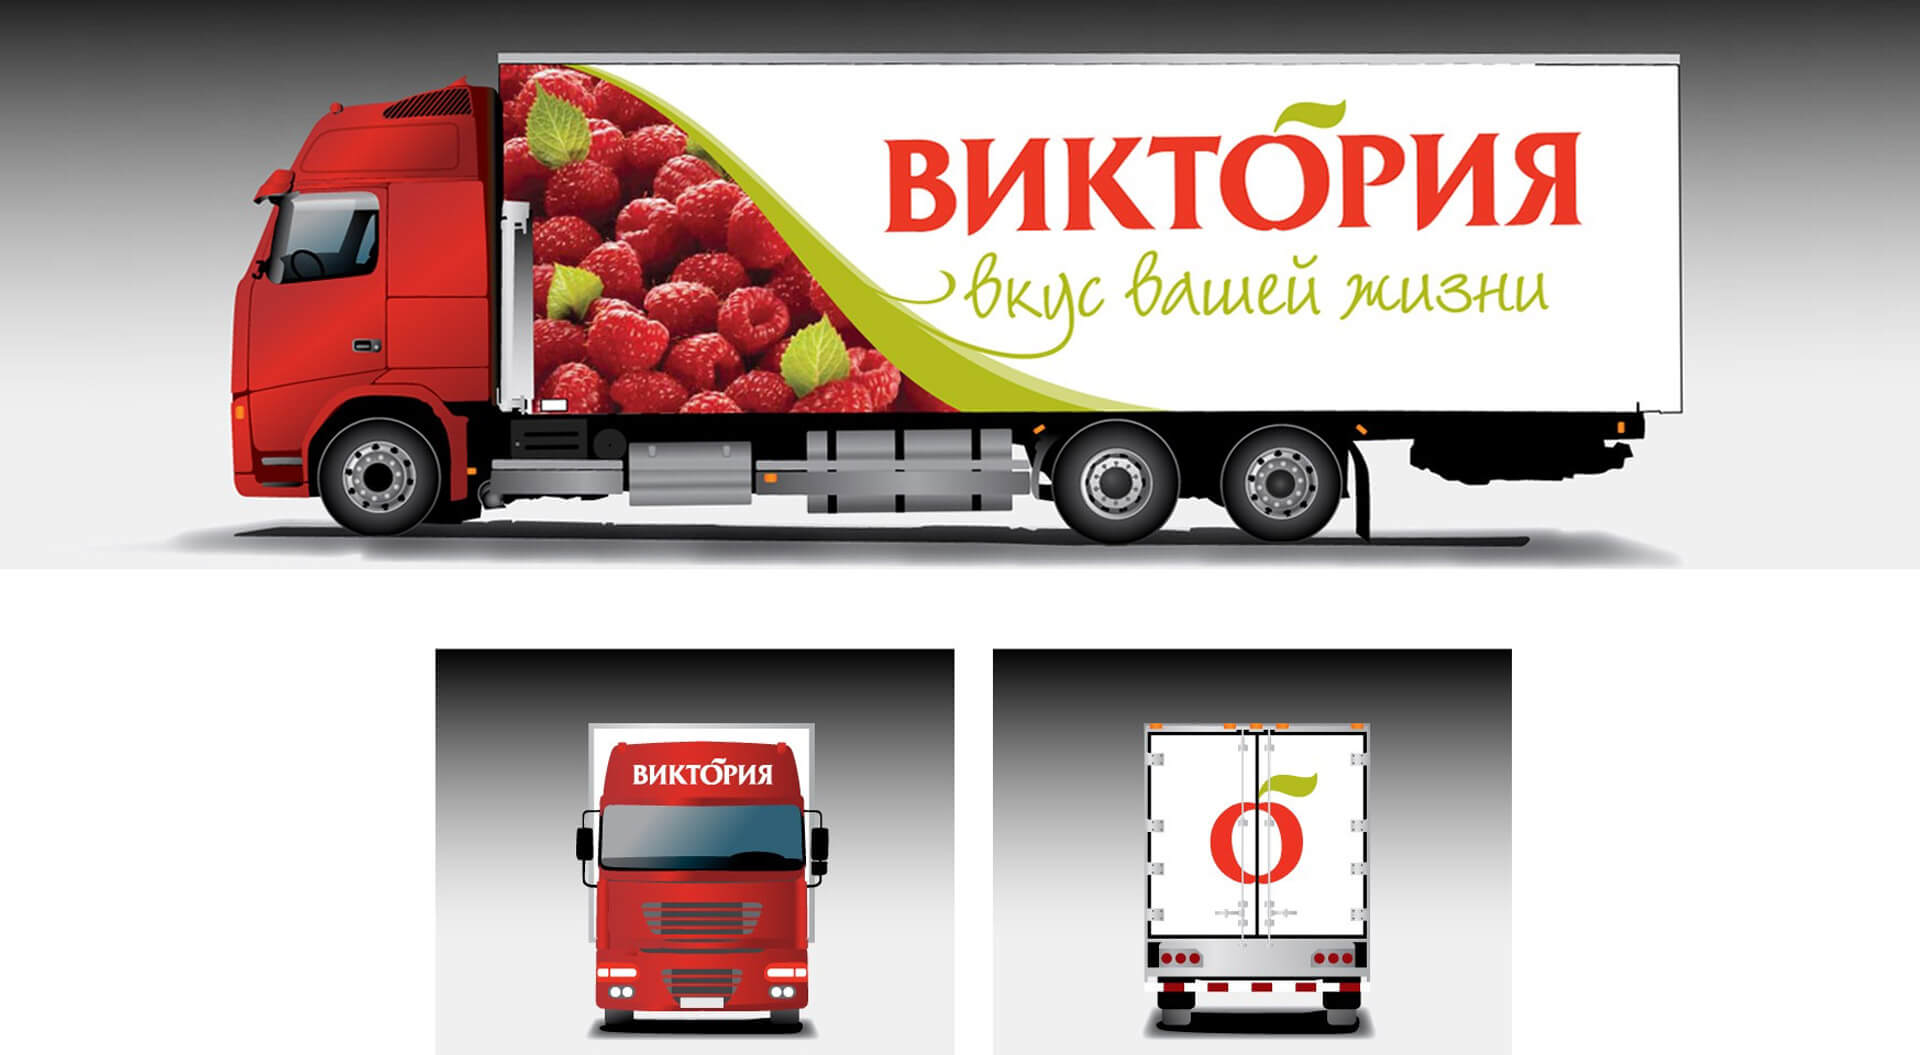 Victoria supermarket brand identity for trucks and logistic vehicles